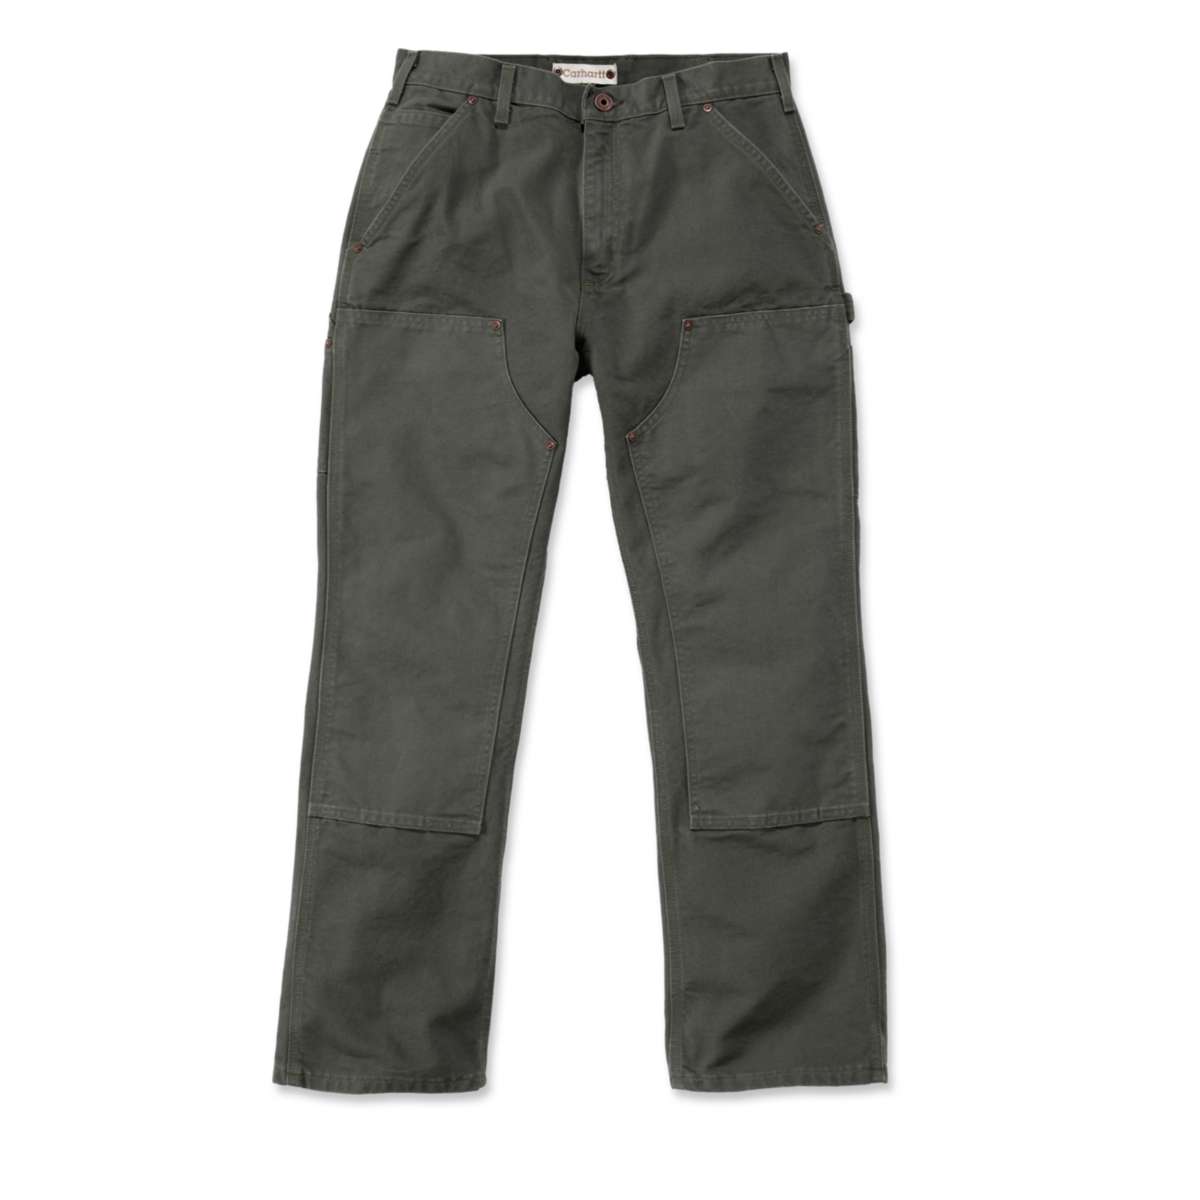 Carhartt Men's -Washed-Duck Double-Front Work Pants - Green, 30/30